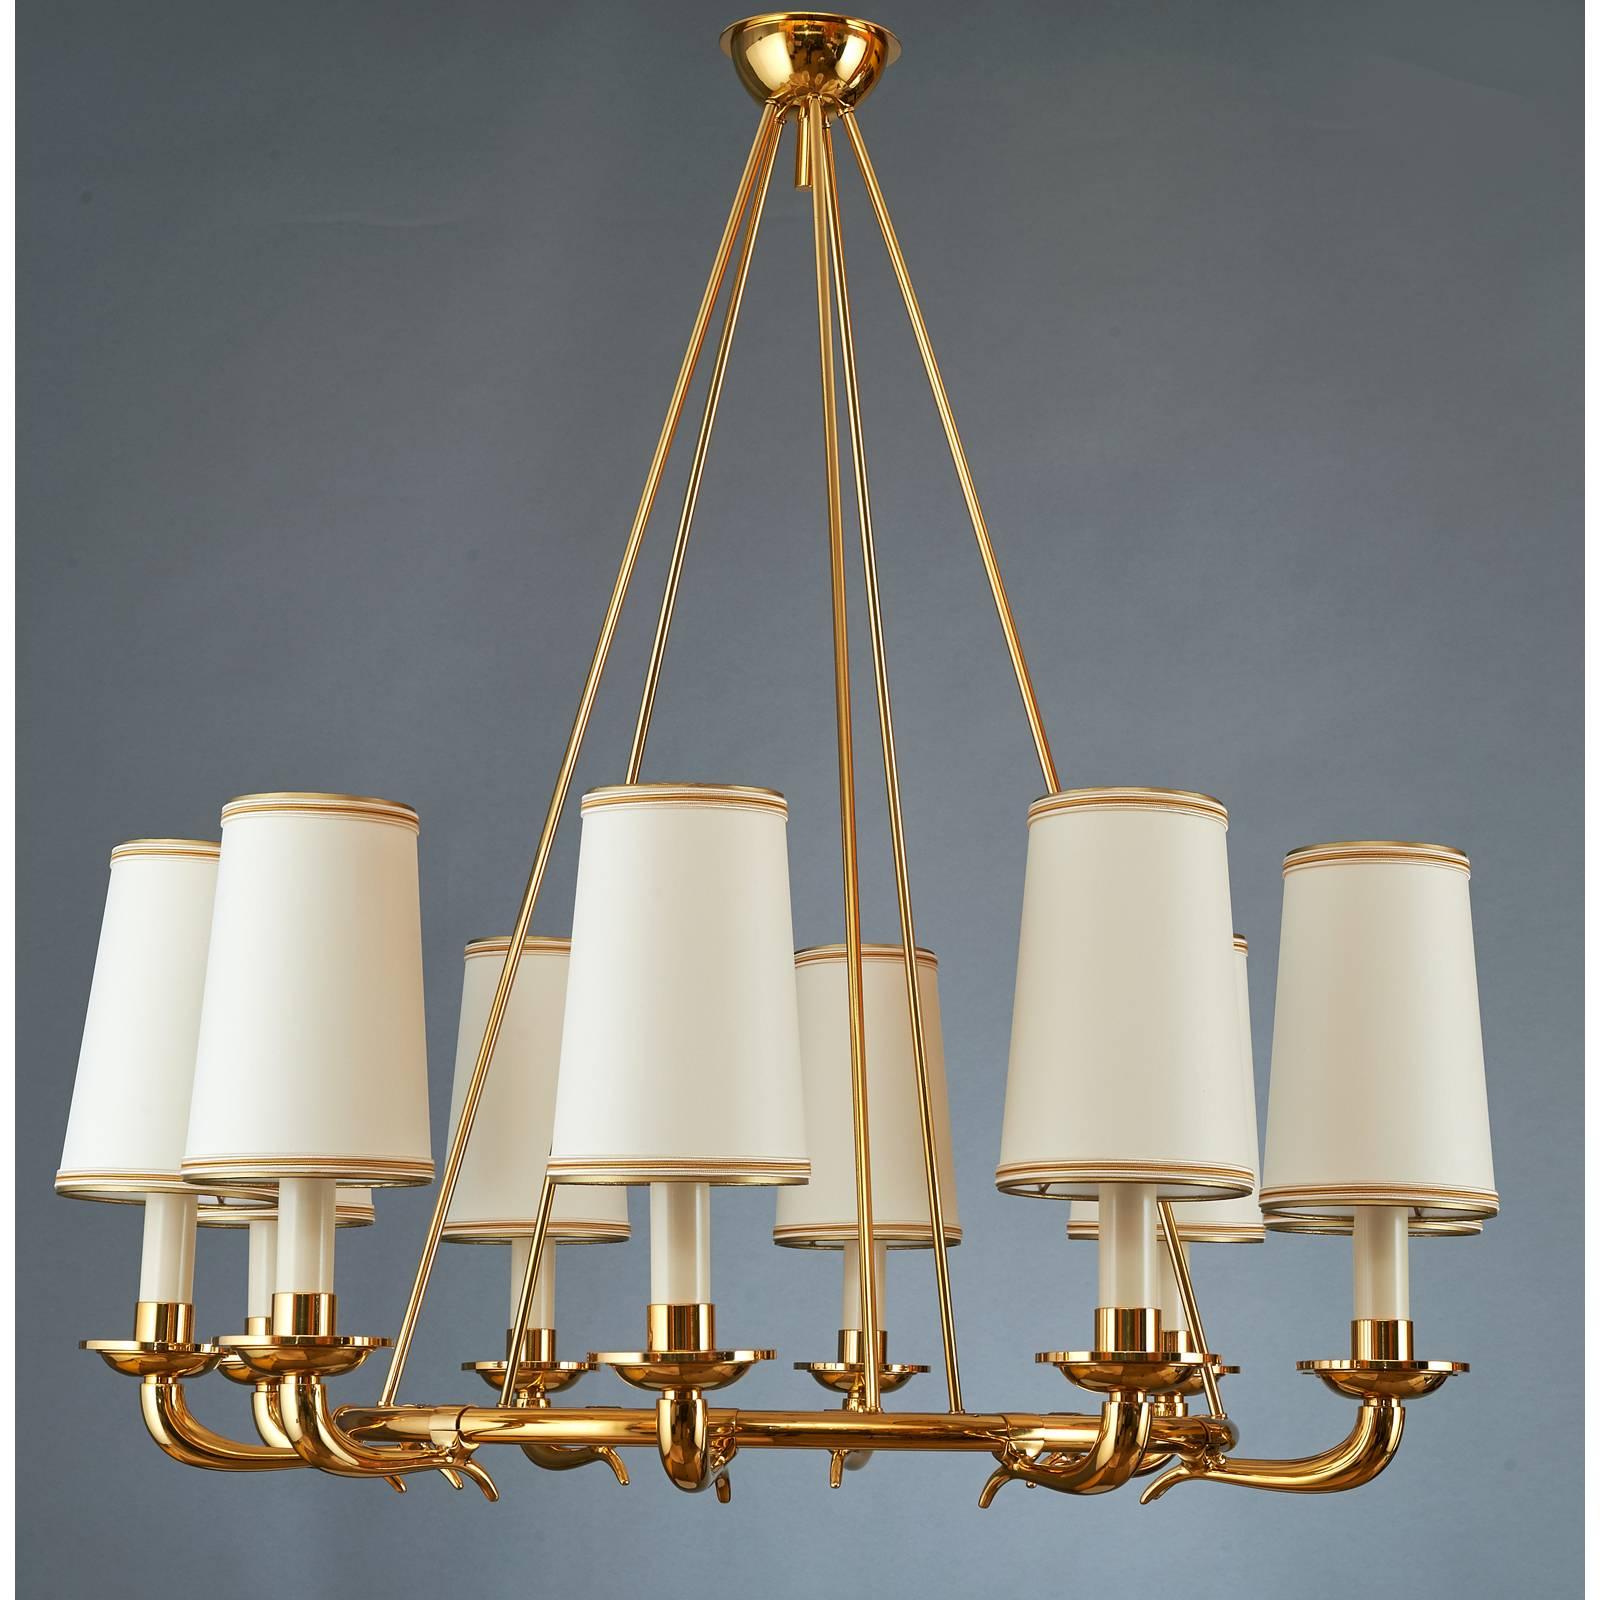 Italy, 1950s
An elegant ten branch chandelier in polished brass 
with gracefully styled cornucopia arms mounted on a
suspended circular frame.
34 diameter x 35 H
Rewired for use in the USA.